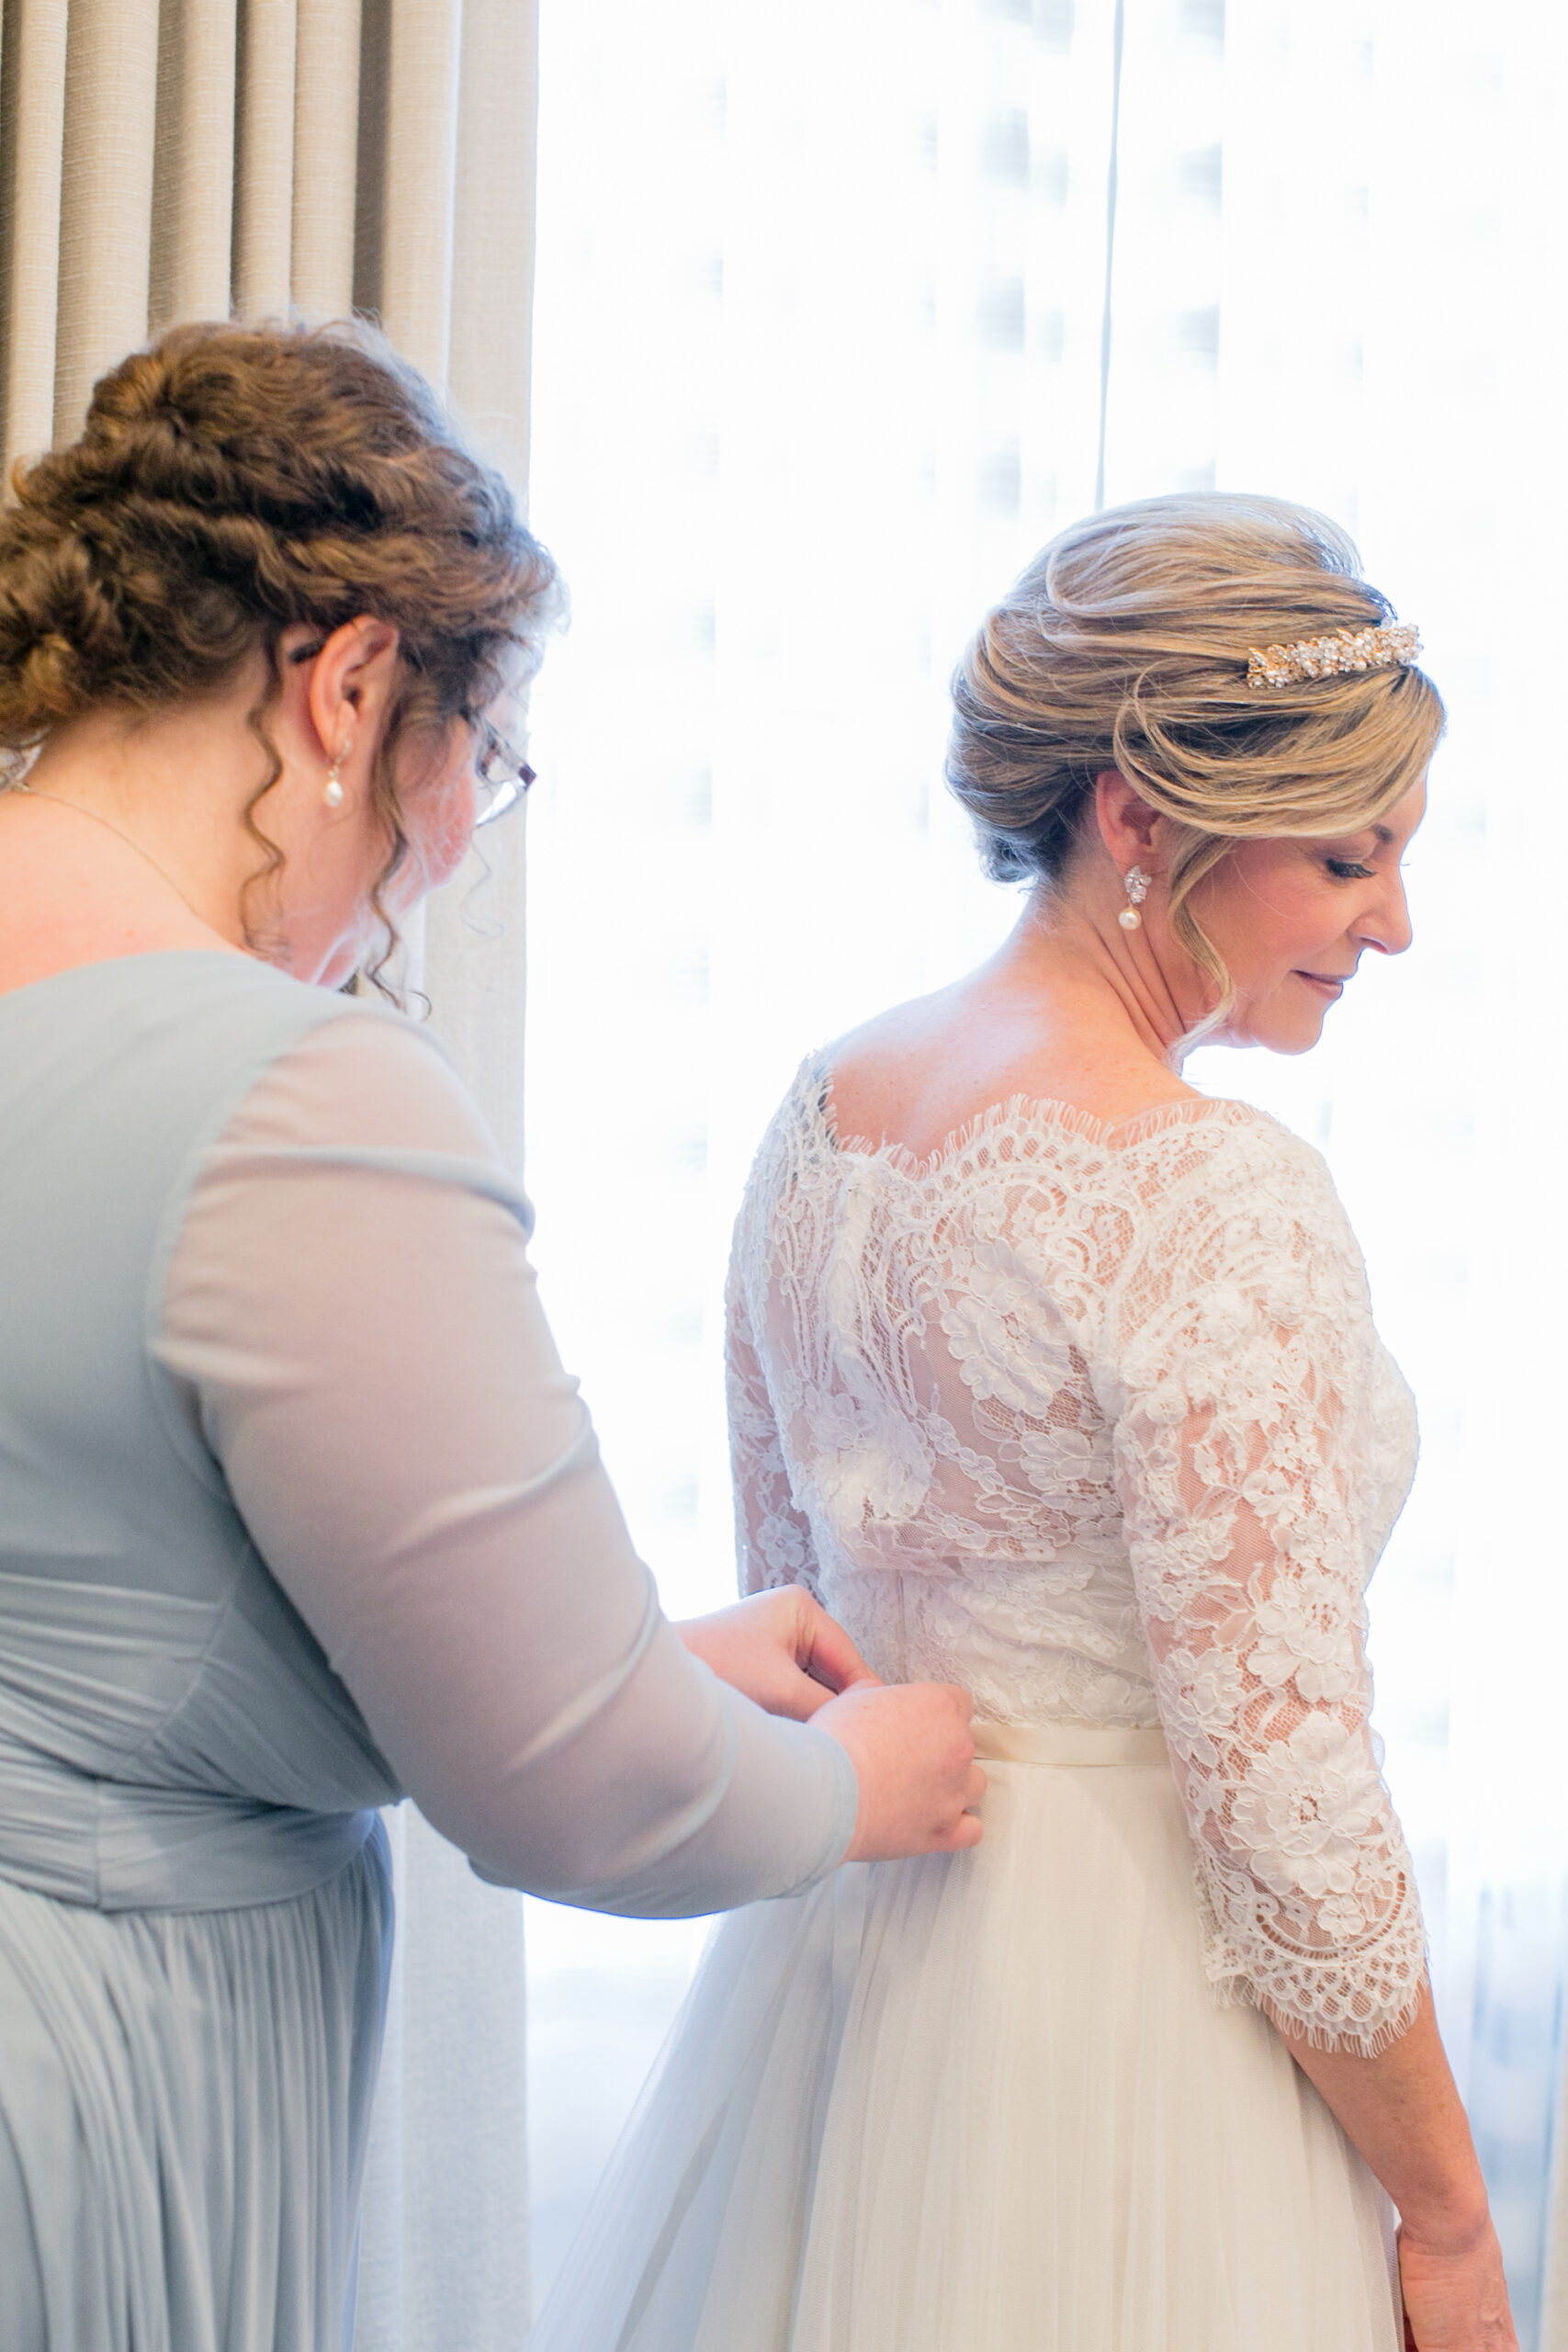 Classic Bride with Maid of Honor Buttoning Wedding Dress | Tampa Bay Wedding Photographer Carrie Wildes Photography | St. Pete Wedding Hair and Makeup Adore Bridal